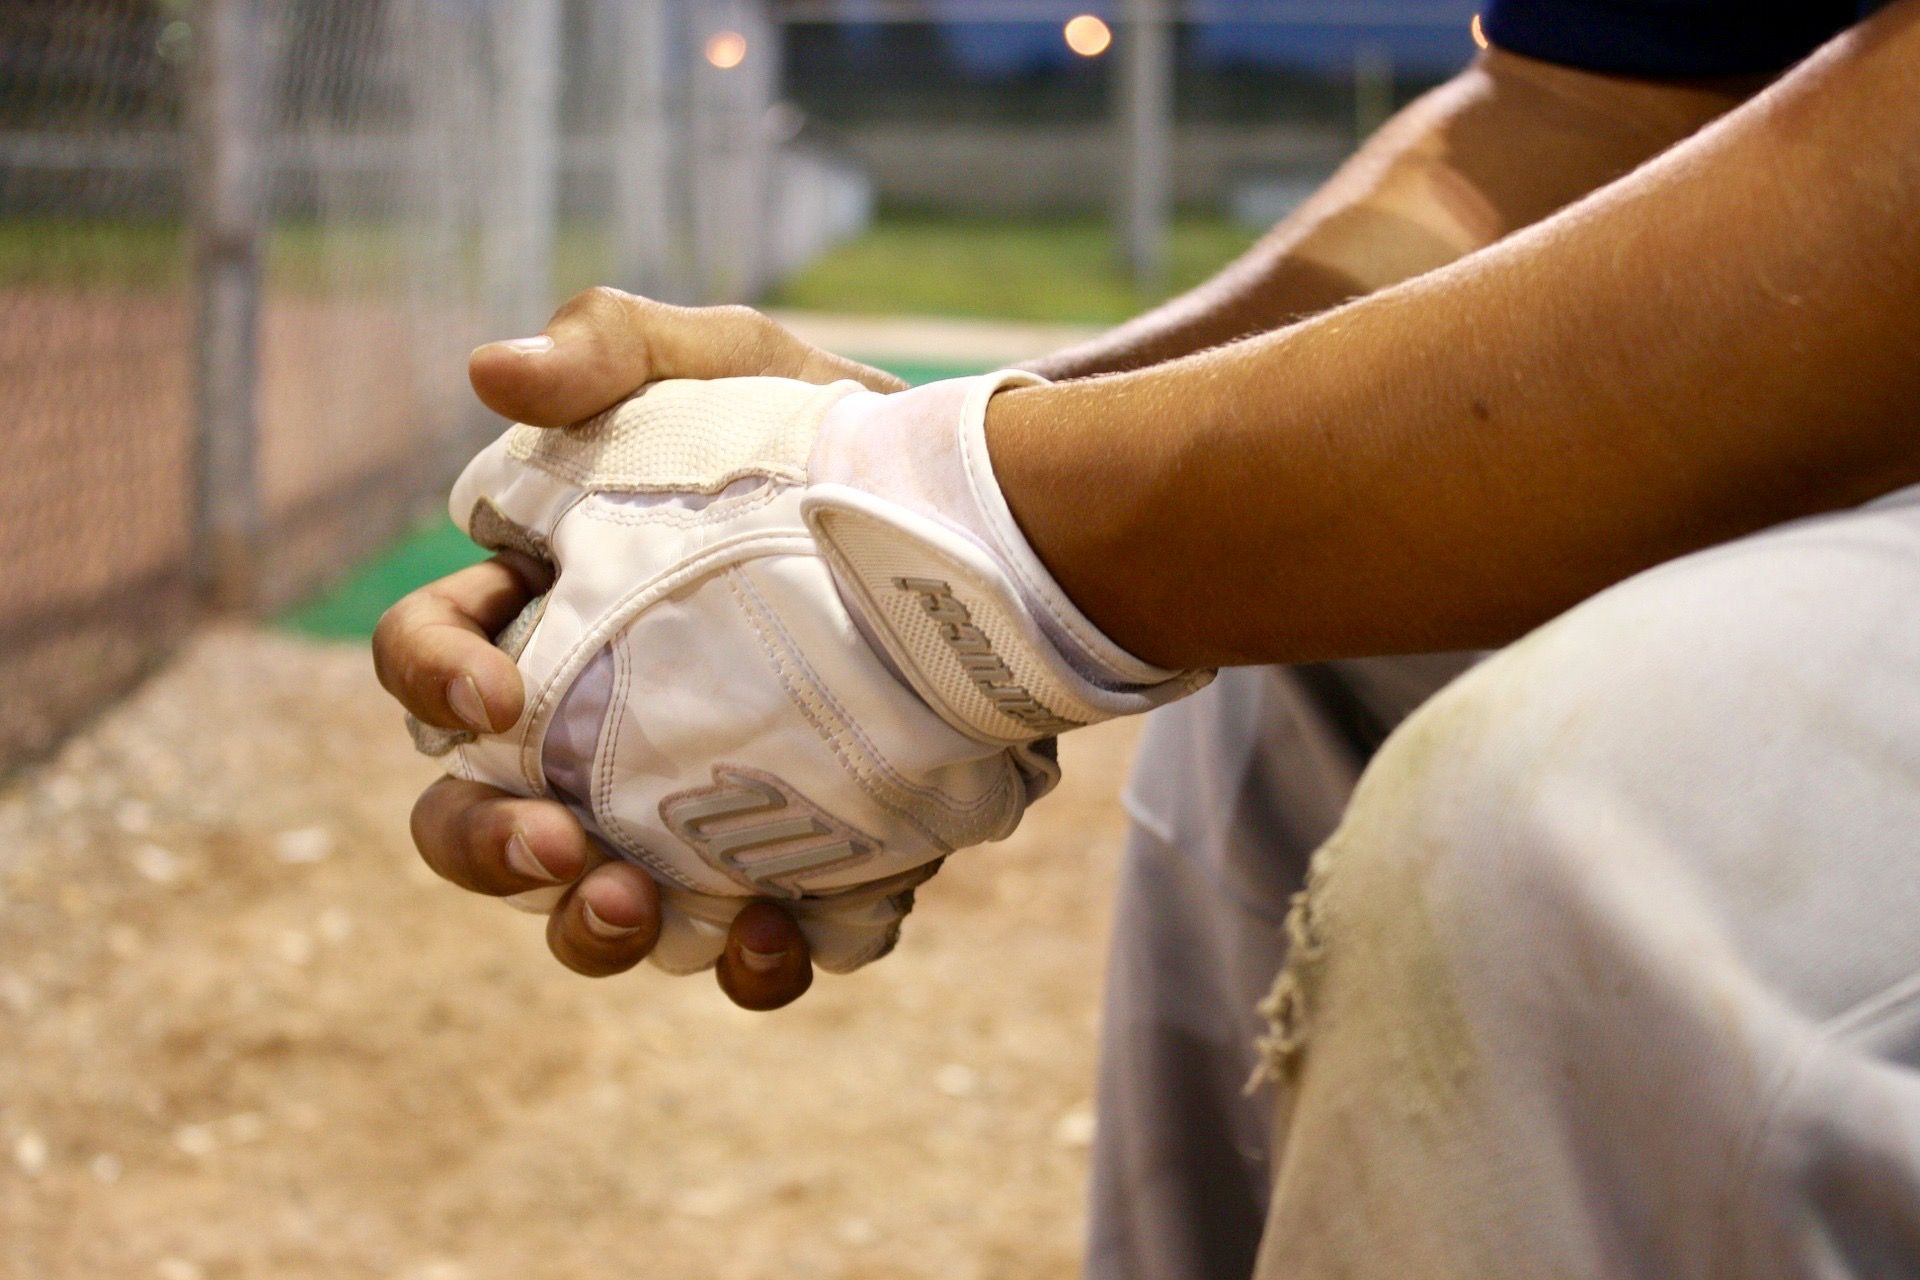 Baseball-hands-clenched-gloves-freedomain.jpg